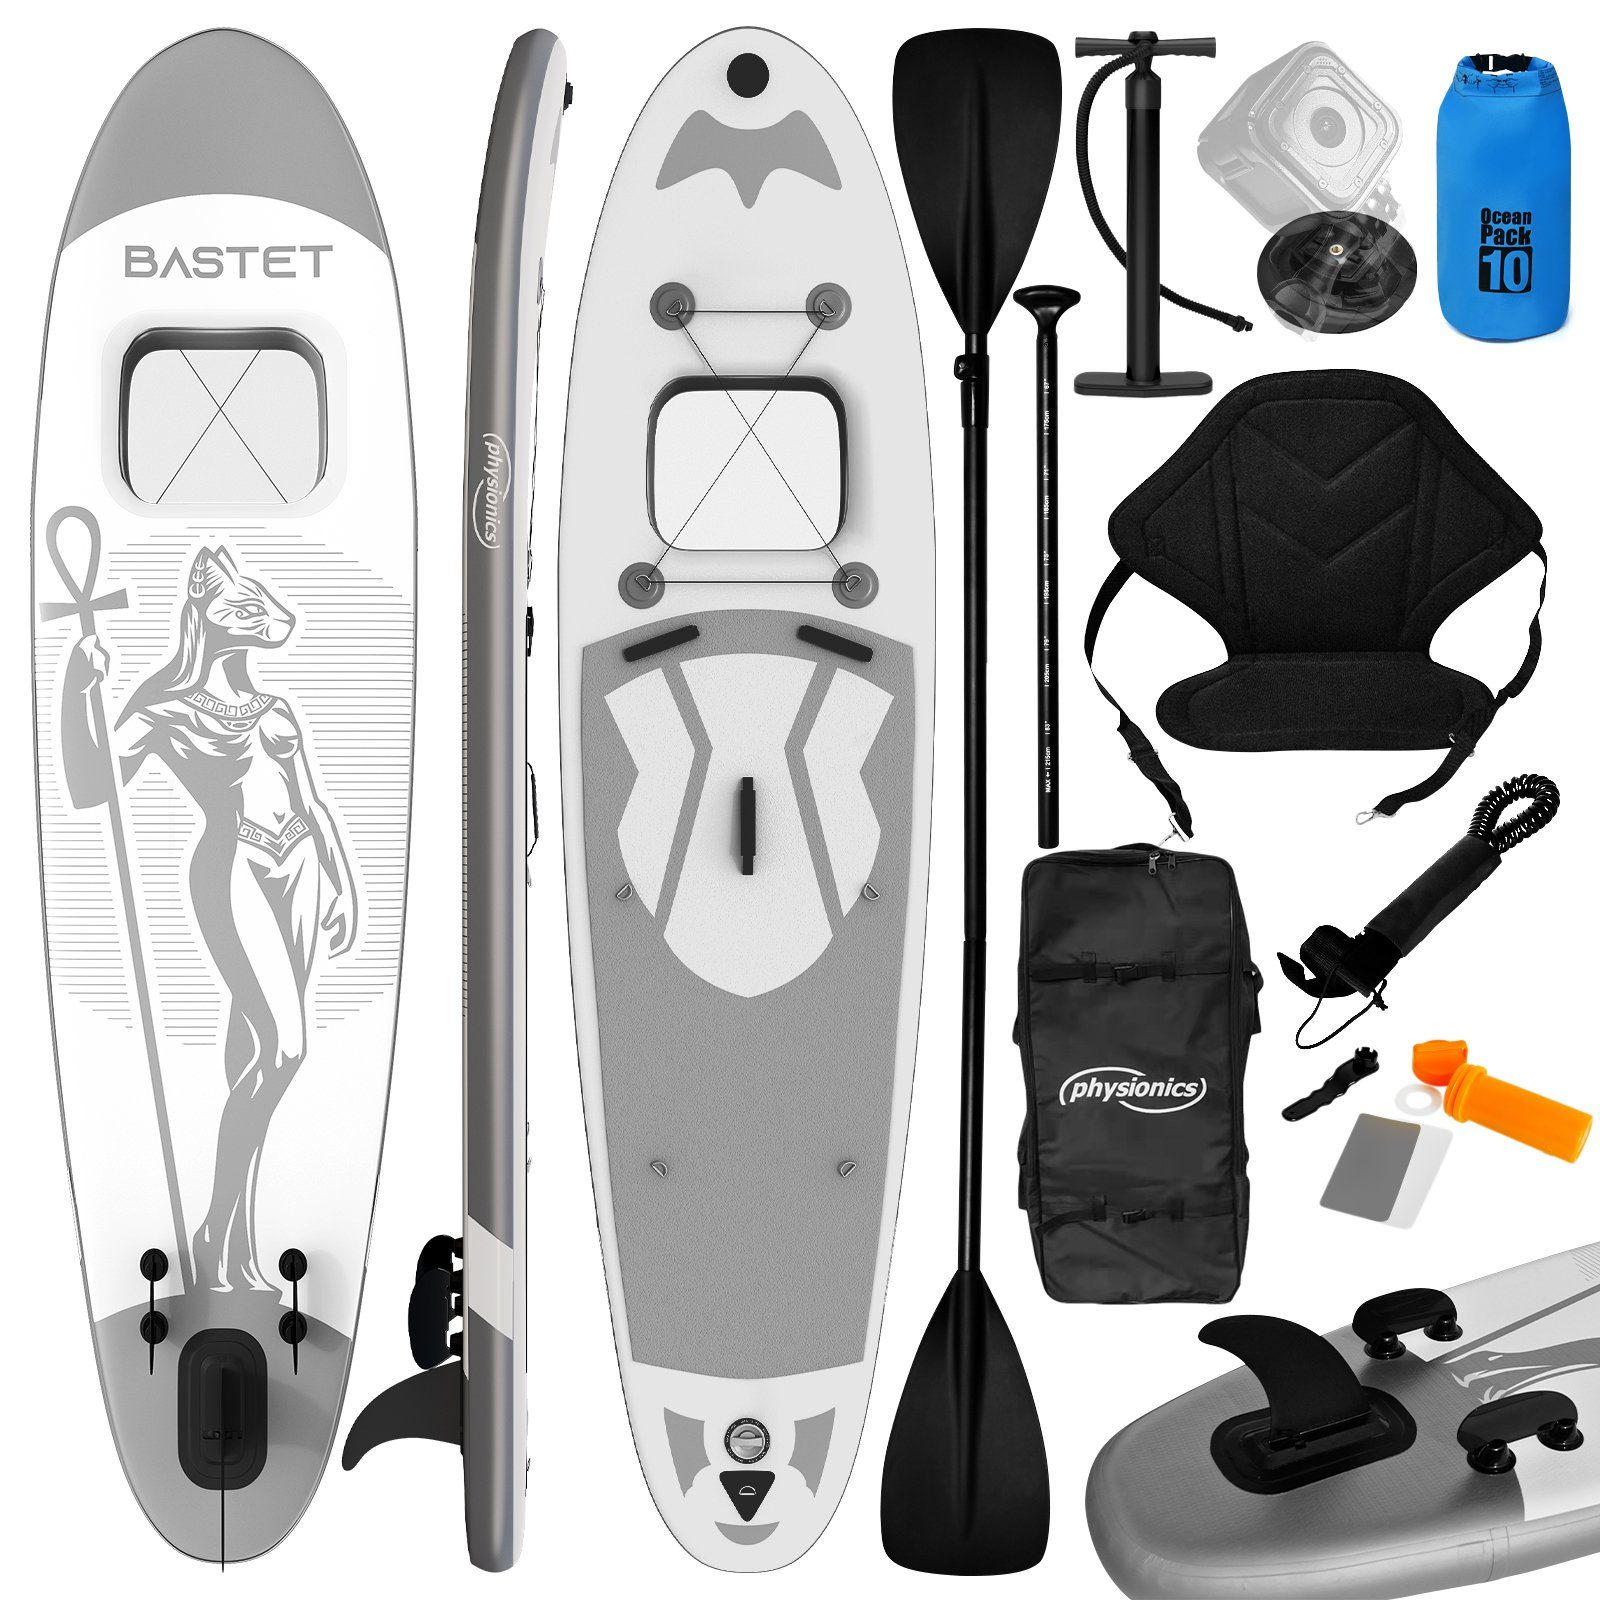 Physionics SUP-Board SUP Aufblasbares Paddle Board Board 305cm Stand Bastet(Silber) Up